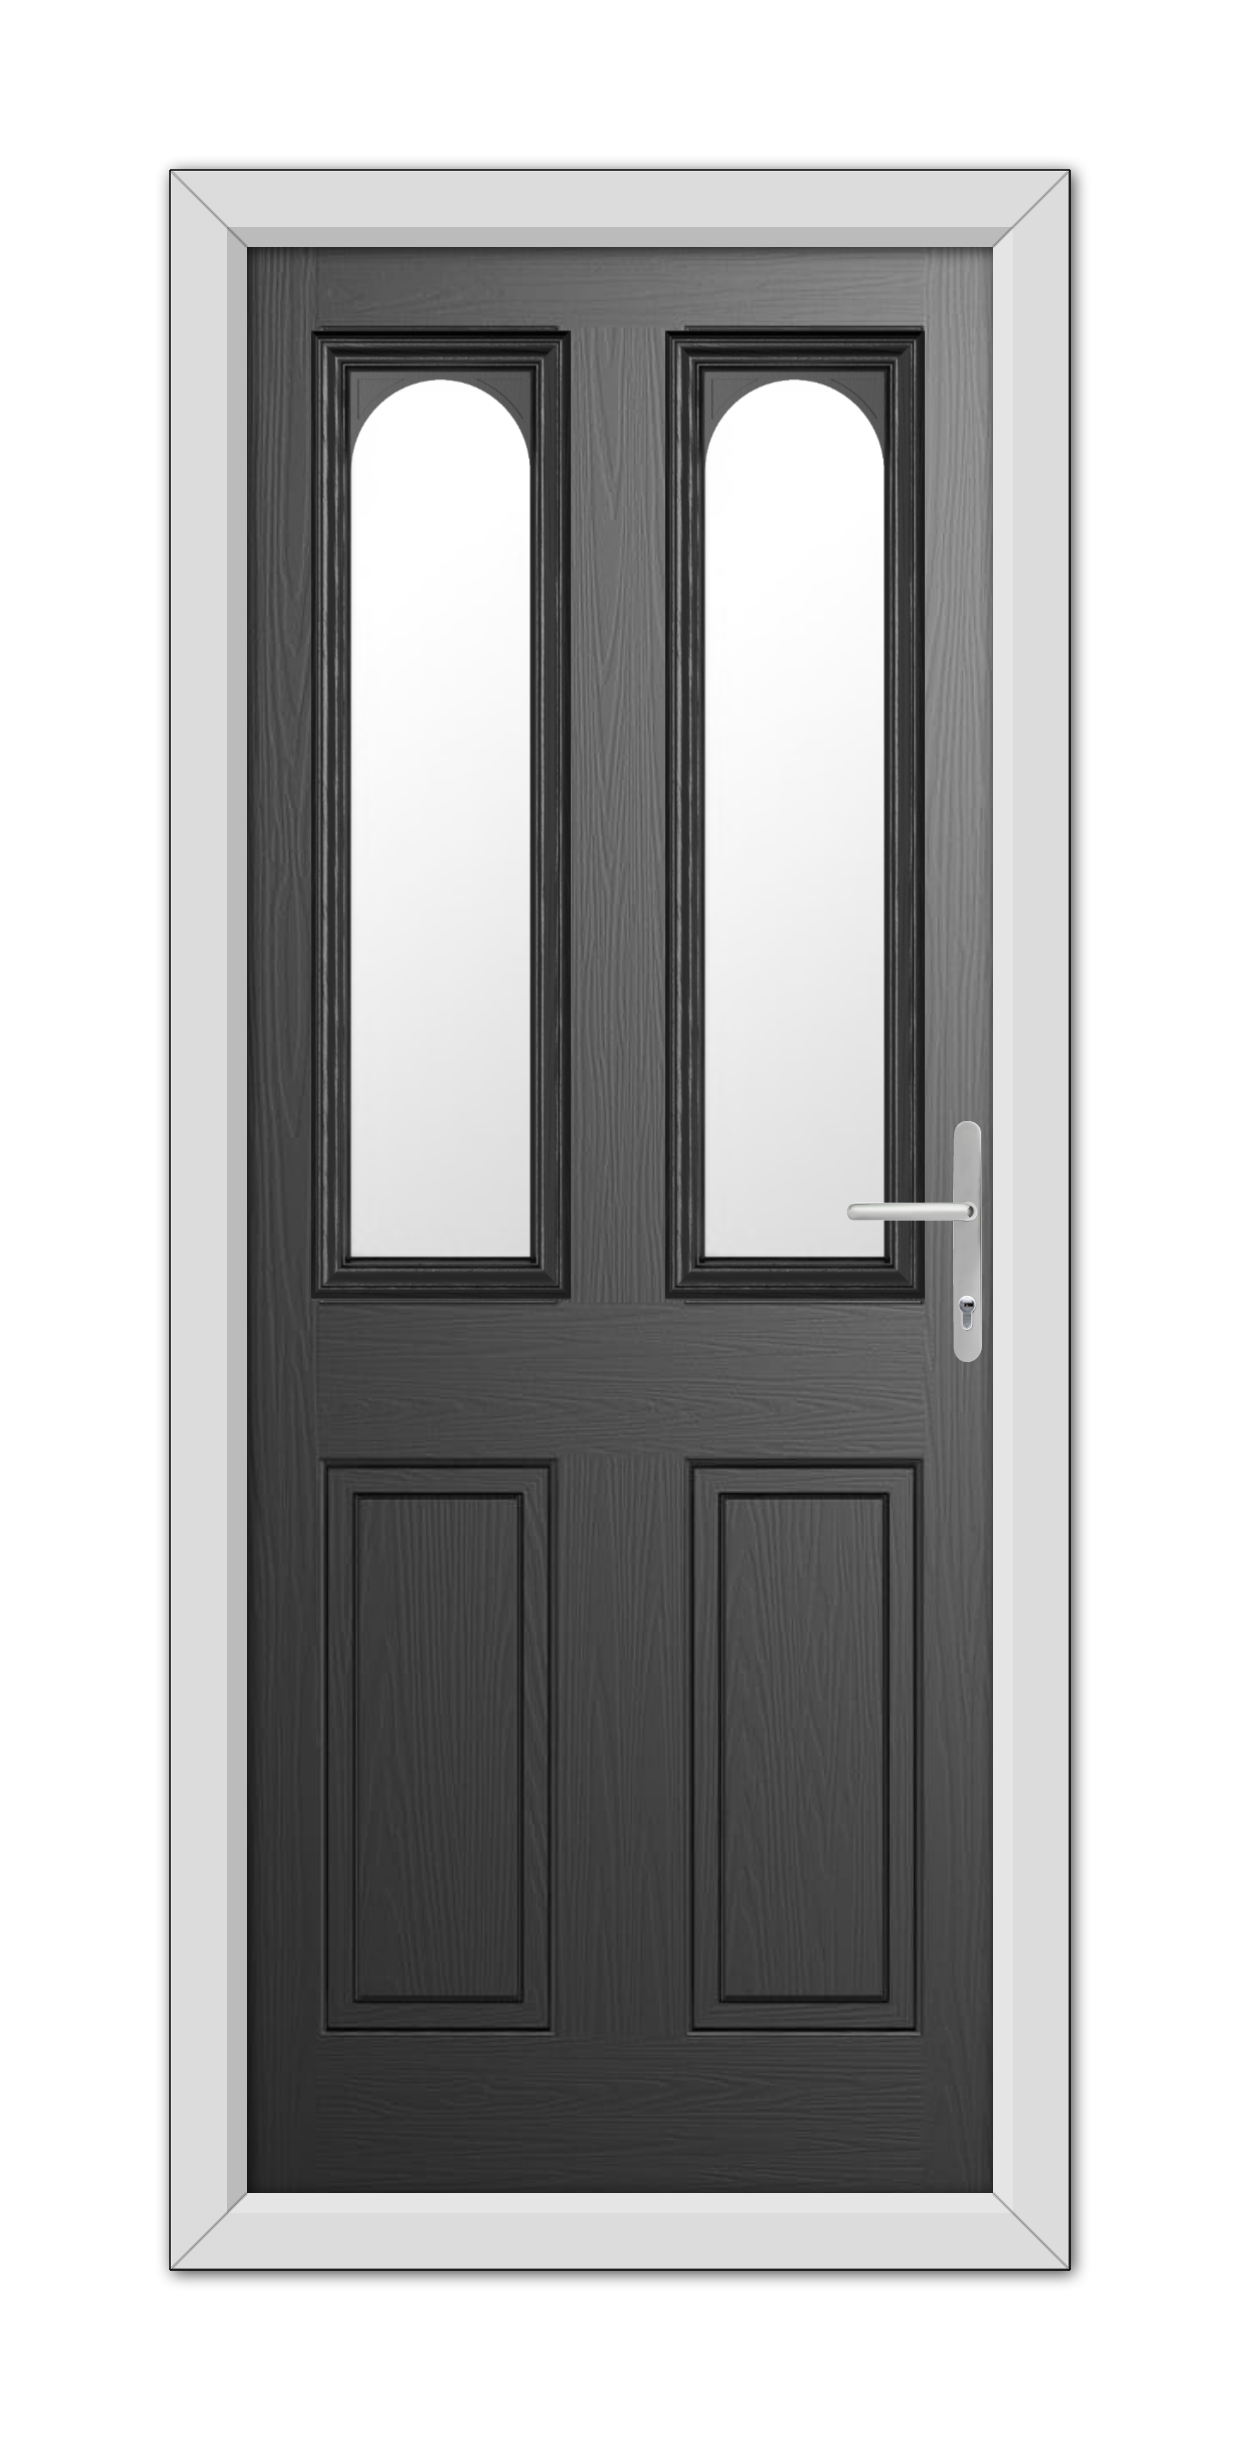 A Black Elmhurst Composite Door 48mm Timber Core with a dark wood finish and two vertical glass panels, featuring a silver handle on the right door, set in a white frame.